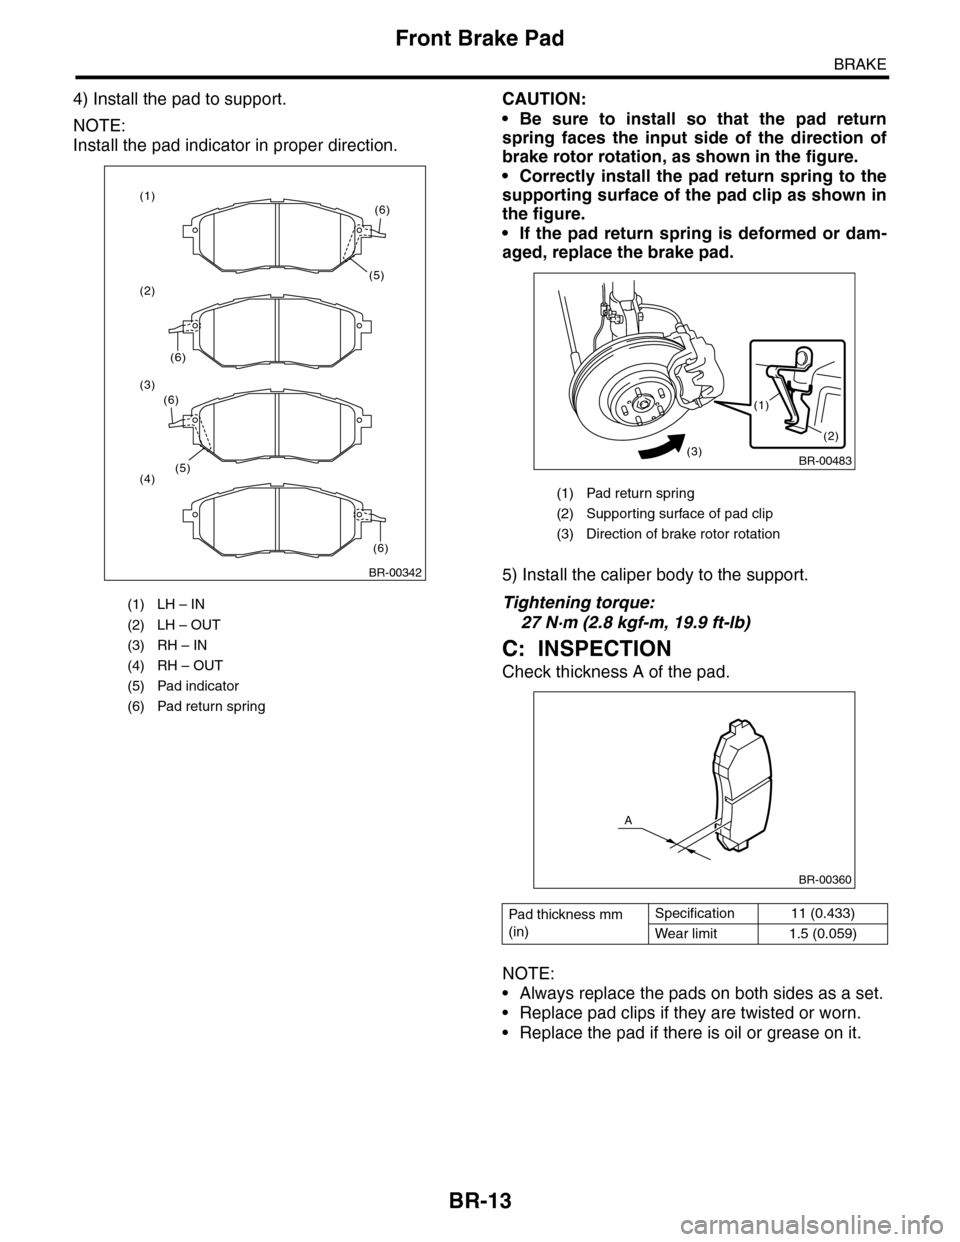 SUBARU TRIBECA 2009 1.G Service Workshop Manual BR-13
Front Brake Pad
BRAKE
4) Install the pad to support.
NOTE:
Install the pad indicator in proper direction.
CAUTION:
•Be sure to install so that the pad return
spring  faces  the  input  side  o